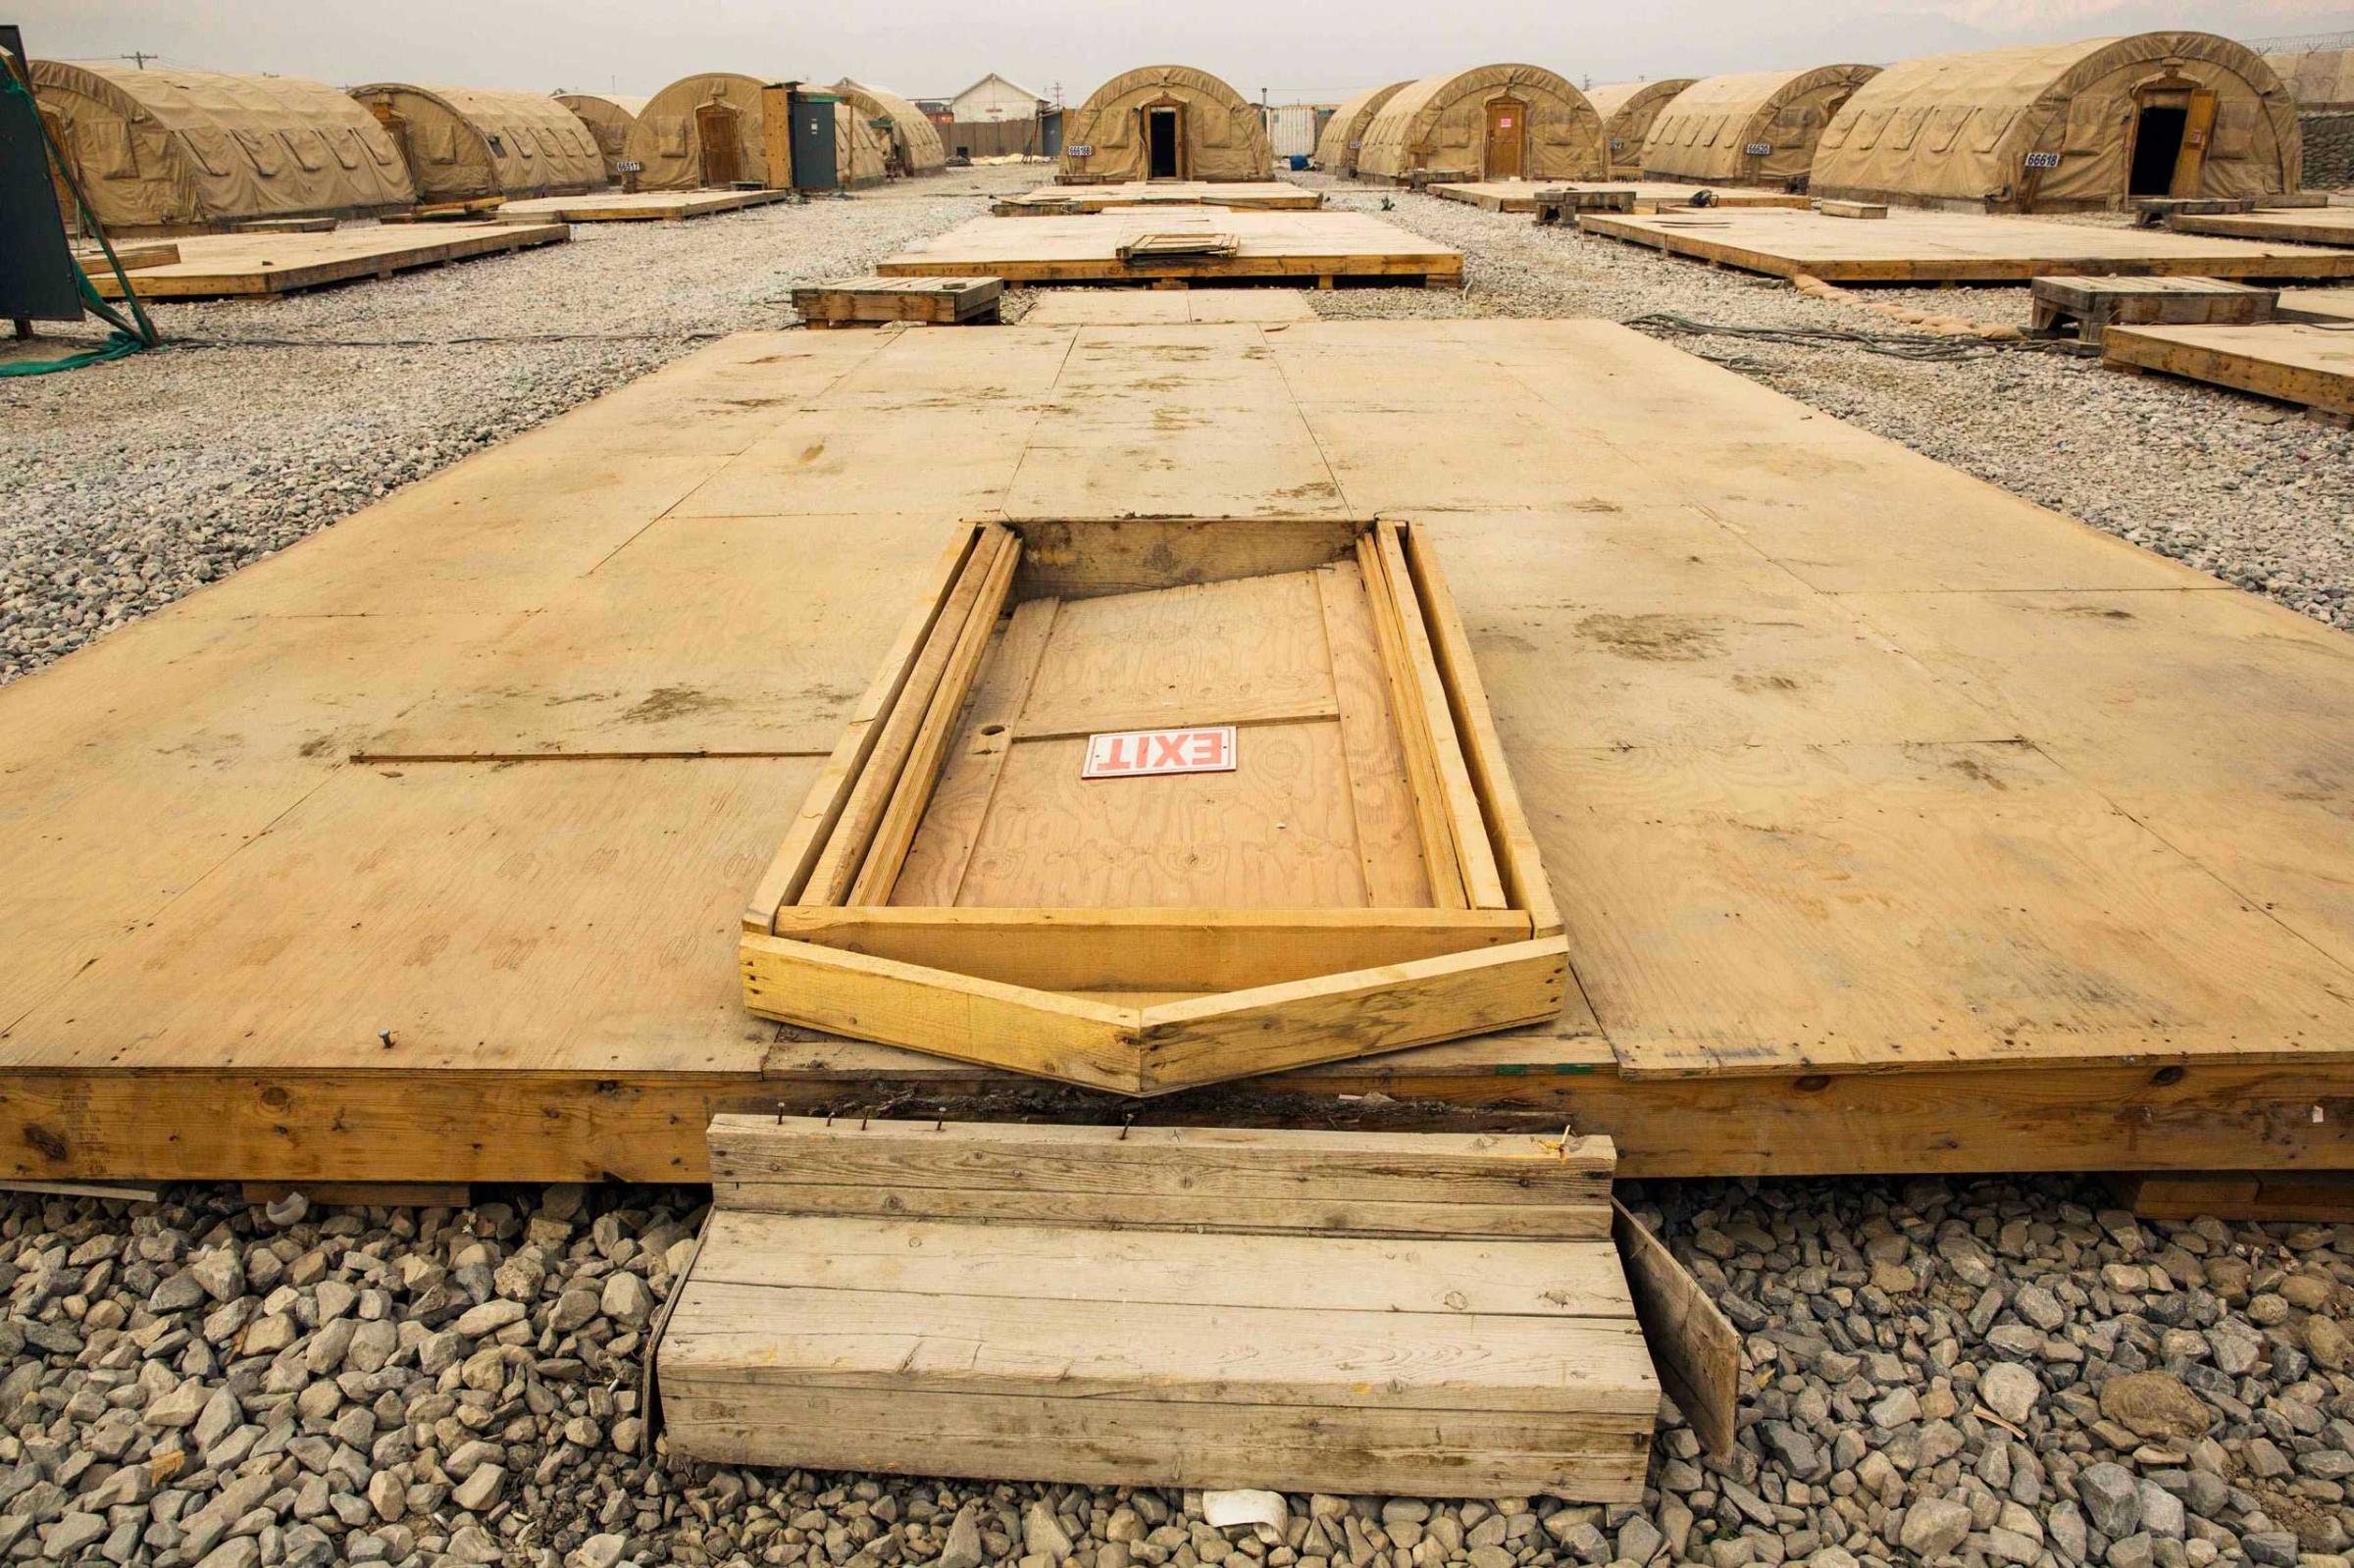 Jan, 2, 2015. A door rests on the floor of a dismantled tent at the Bagram Air Field in the Parwan province of Afghanistan. The base is being shrunk by demolishing large swaths of housing in order to hold roughly 13,000 foreign troops.